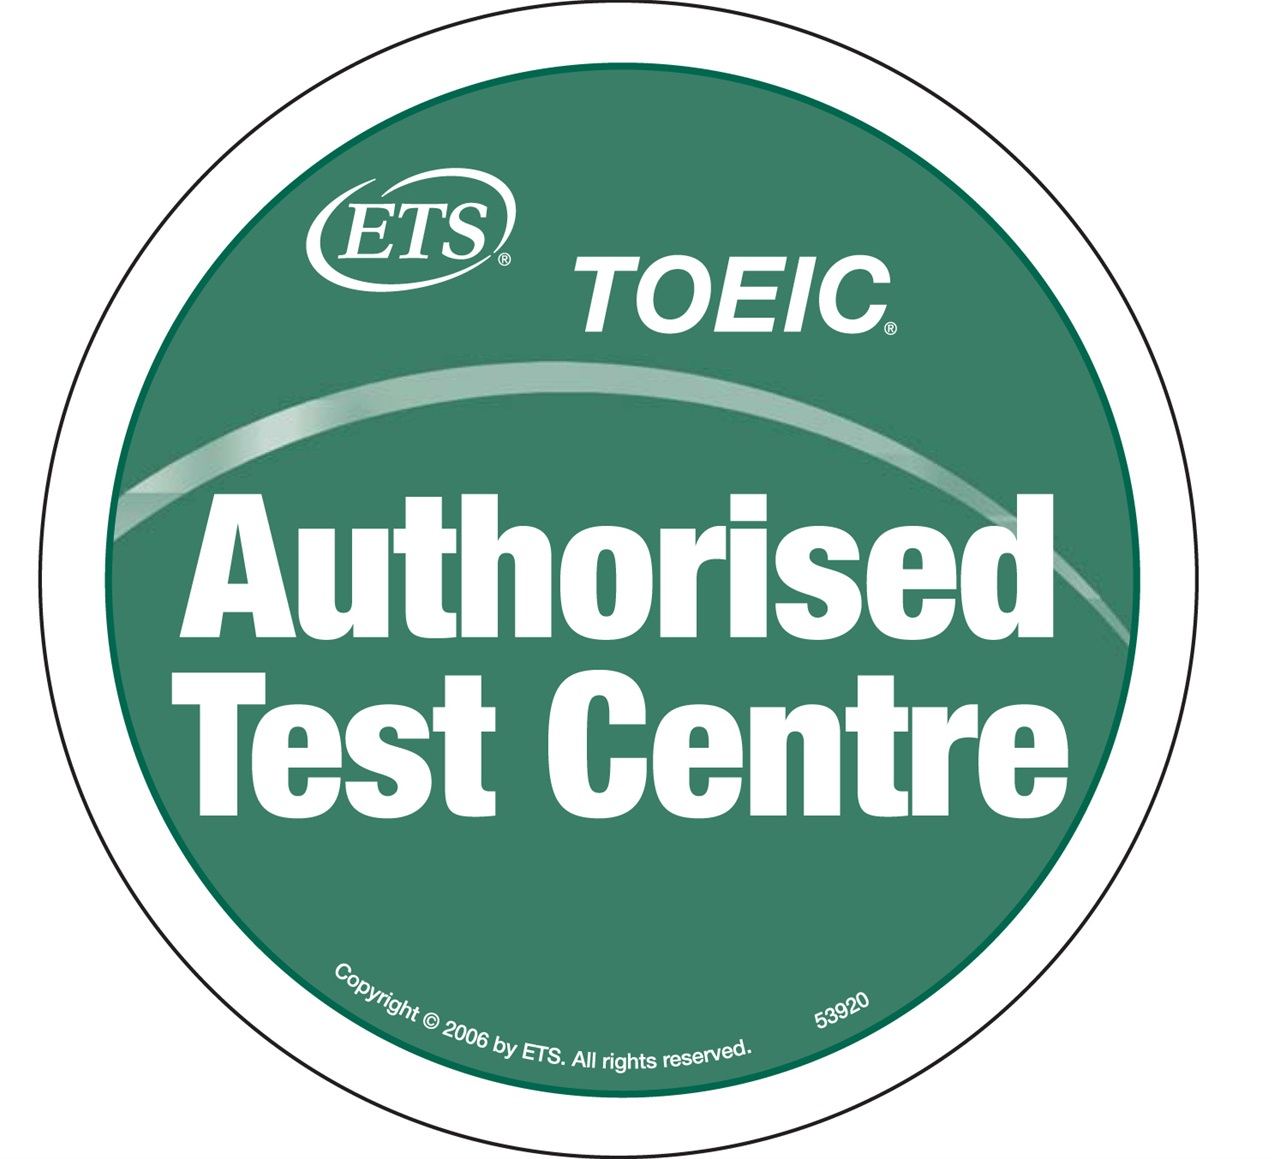 Take your TOEIC test: CANCELLED